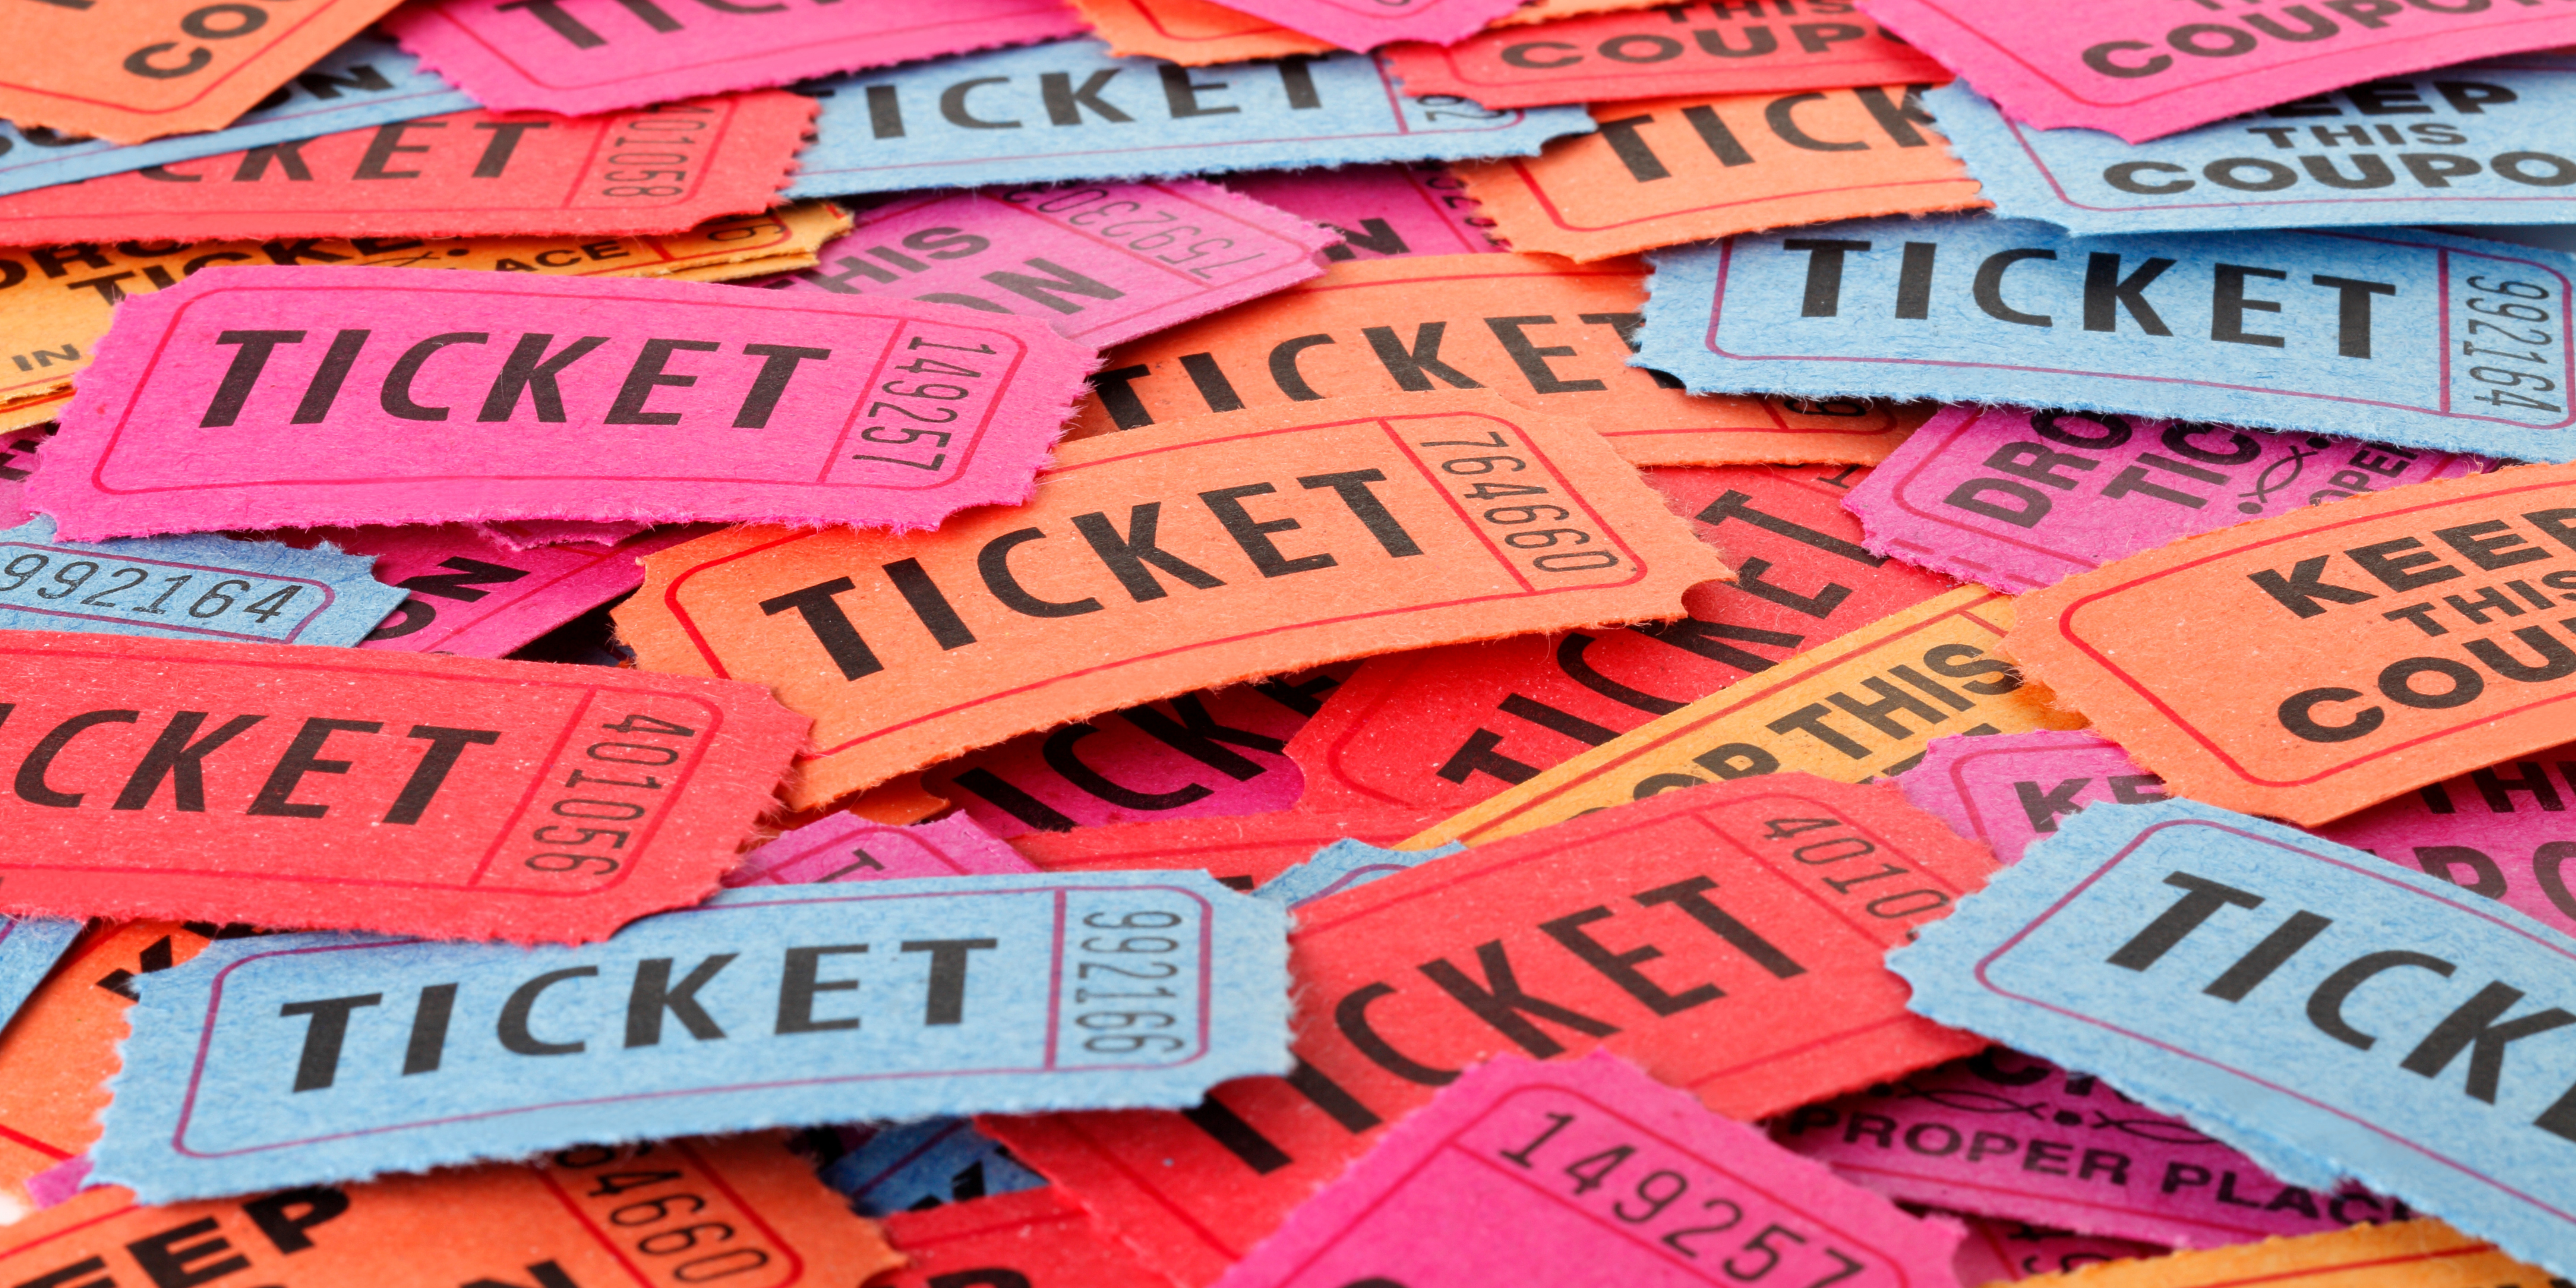 4 Reasons Why You Should Stop Printing Tickets